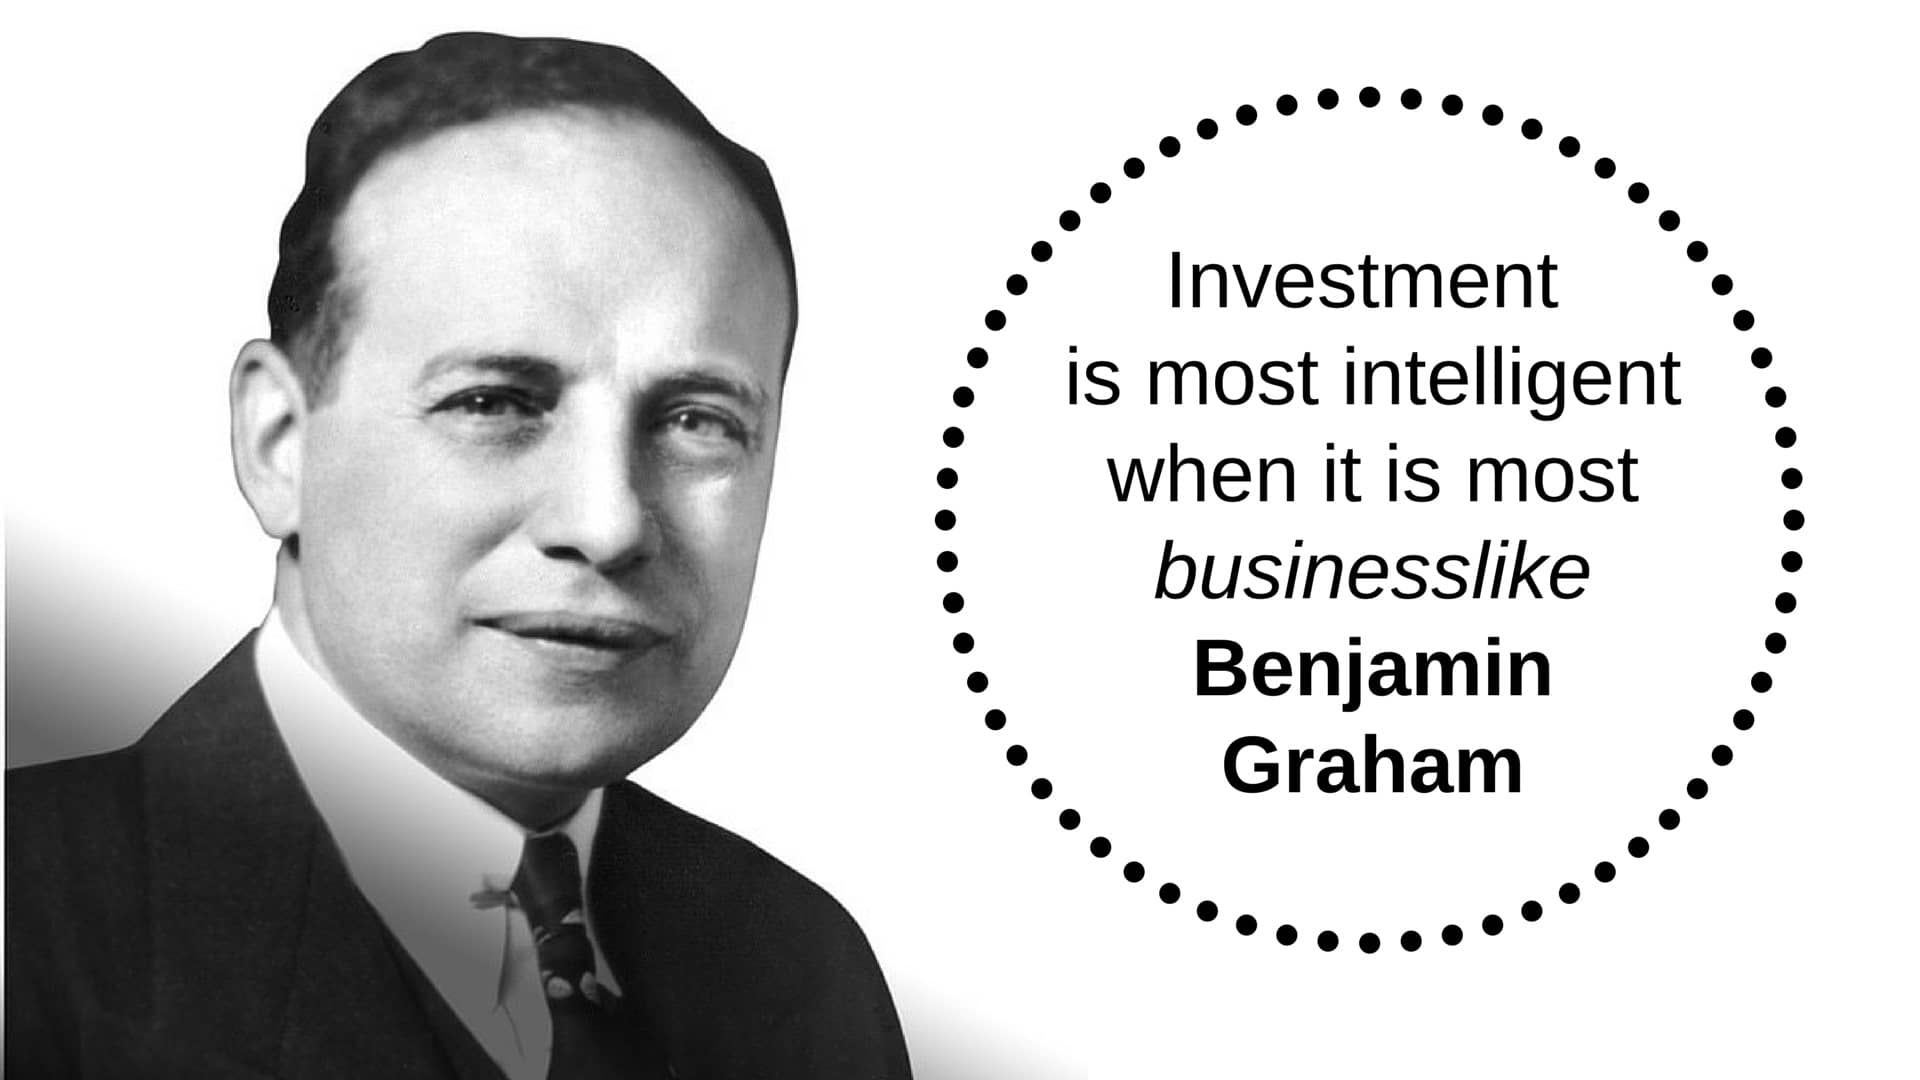 Ben Graham - Investing and Business